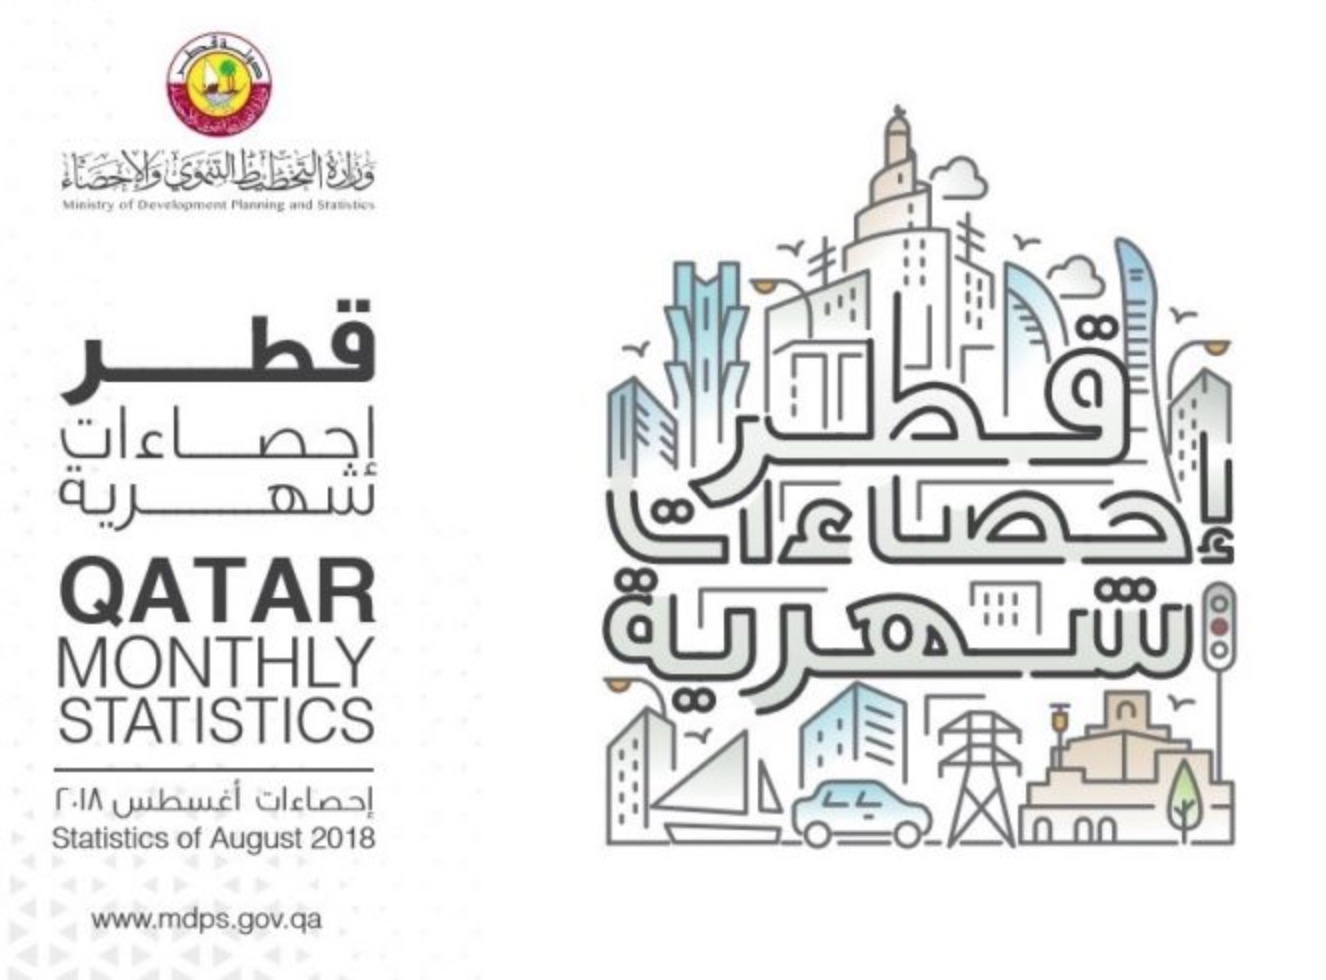 Important statistical data of Qatar in August 2018: MDPS